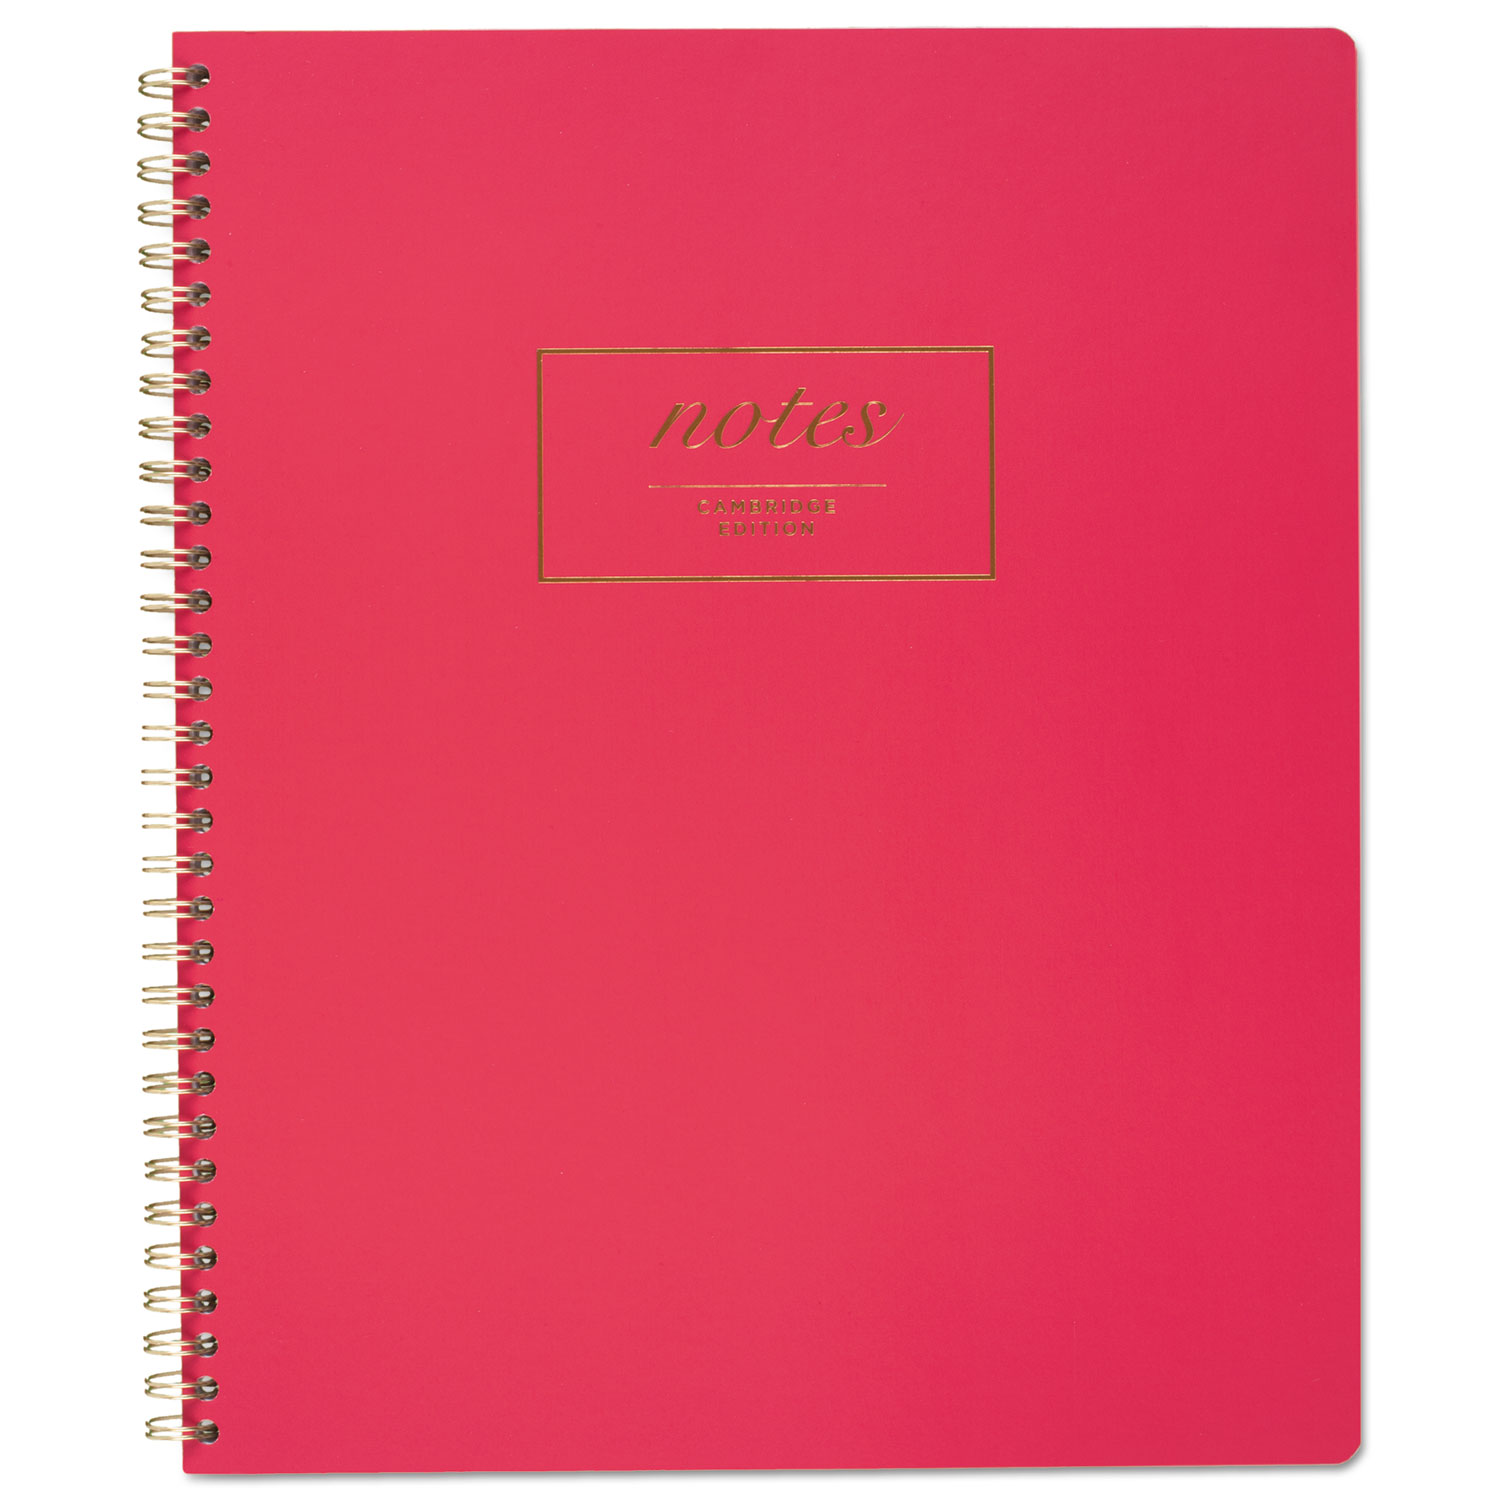 Fashion Twinwire Business Notebook, 11 x 9, Pink, 80 Sheets